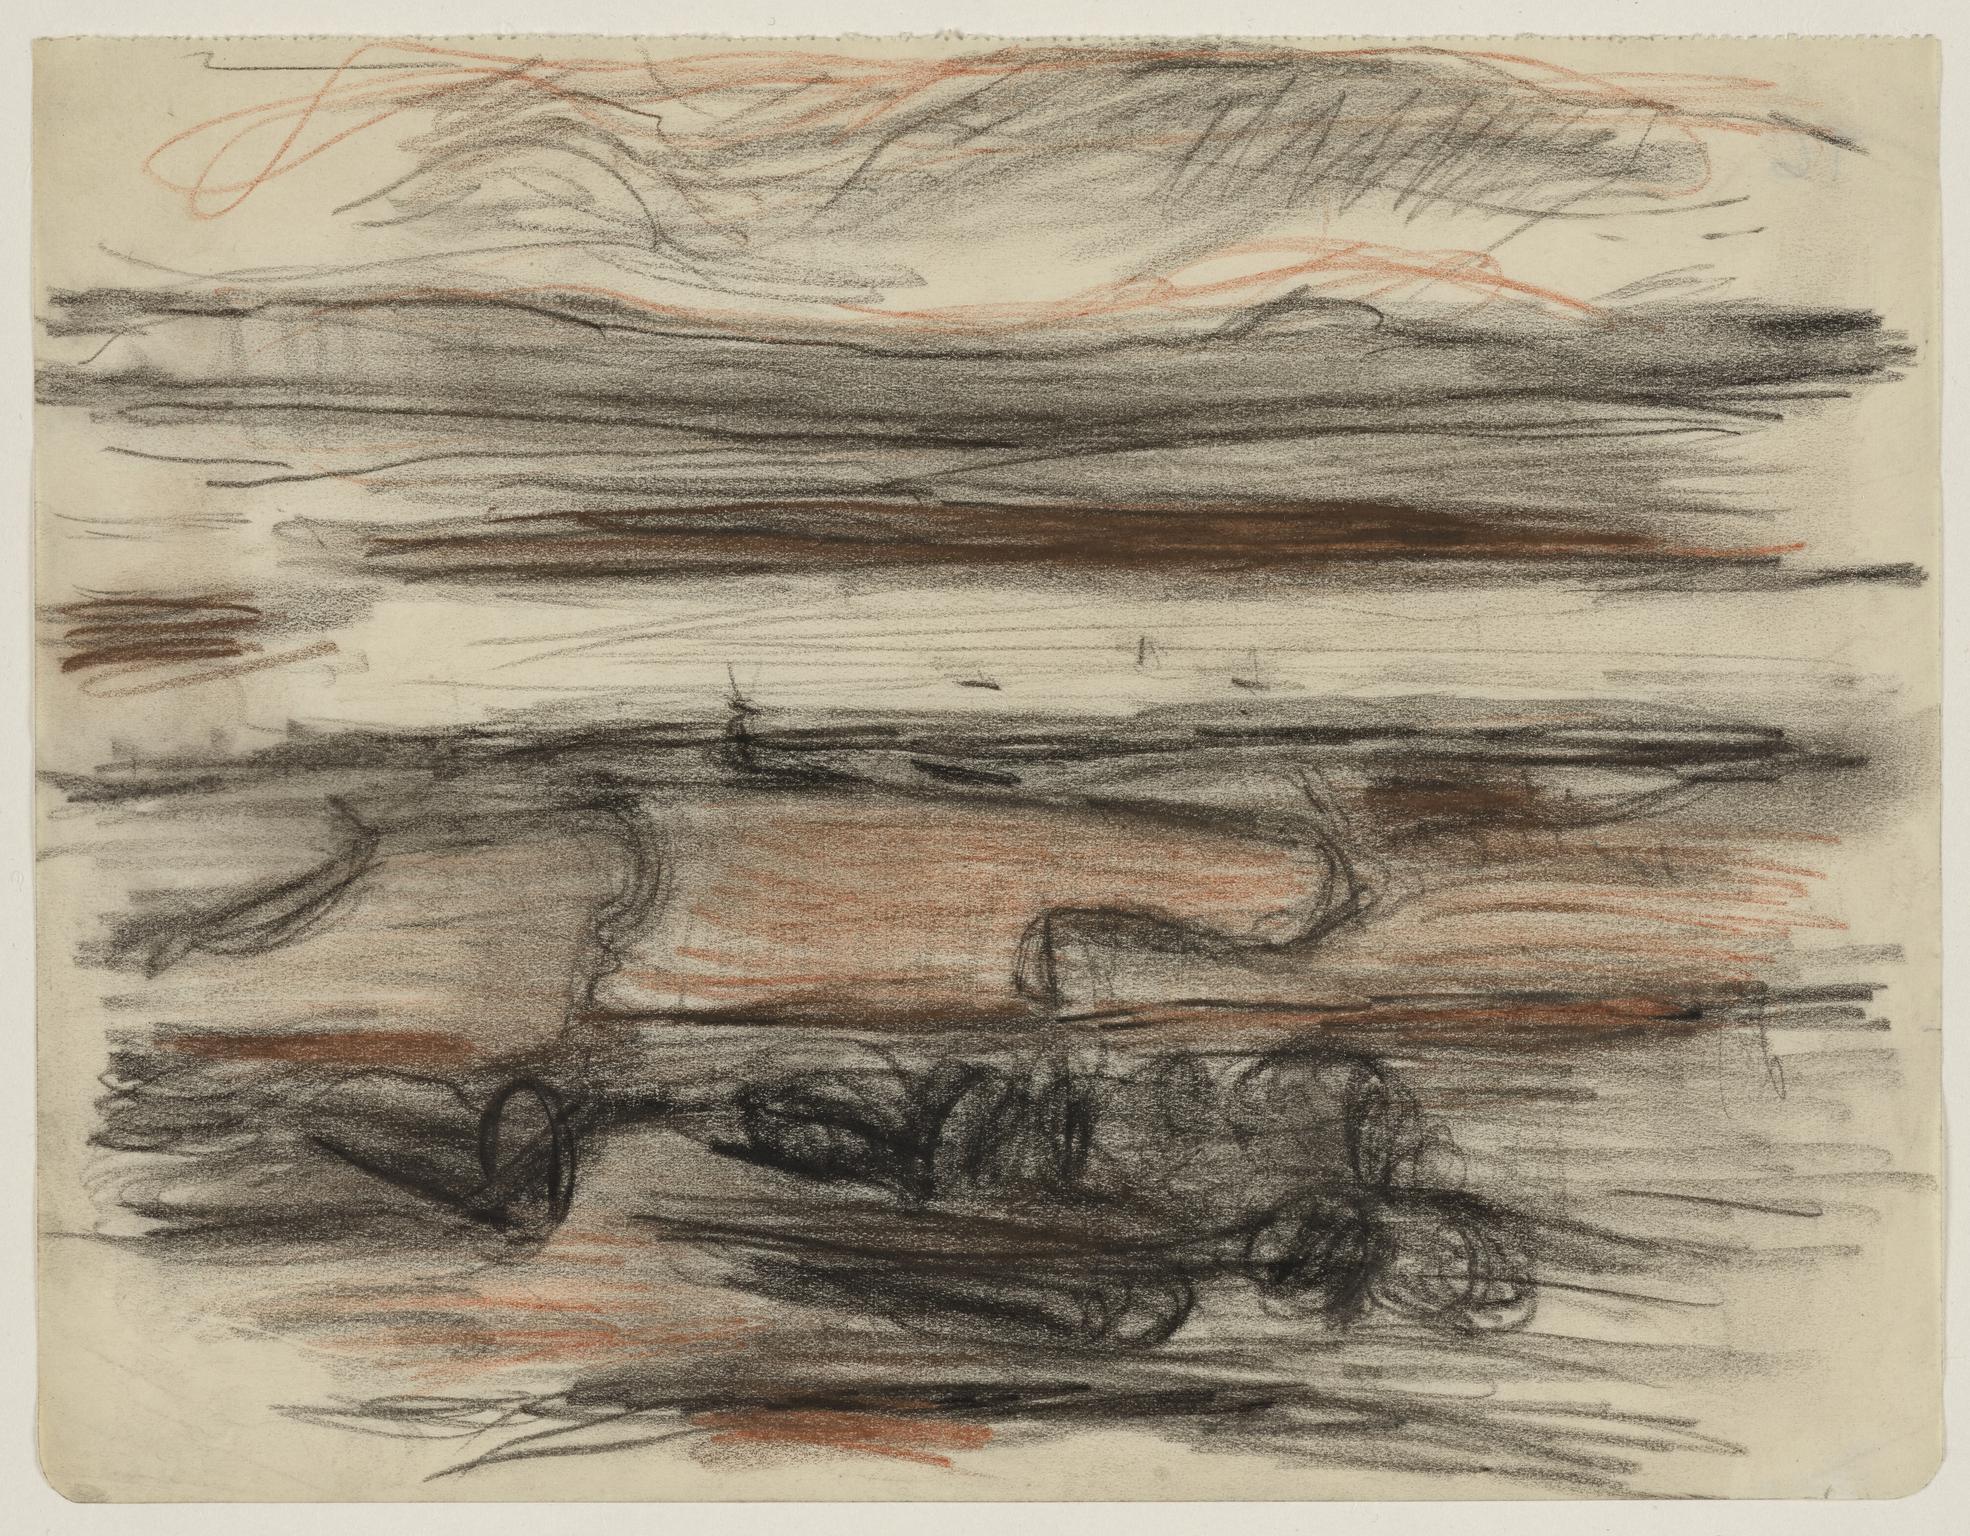 Study for 'Estuary of the River Dee'